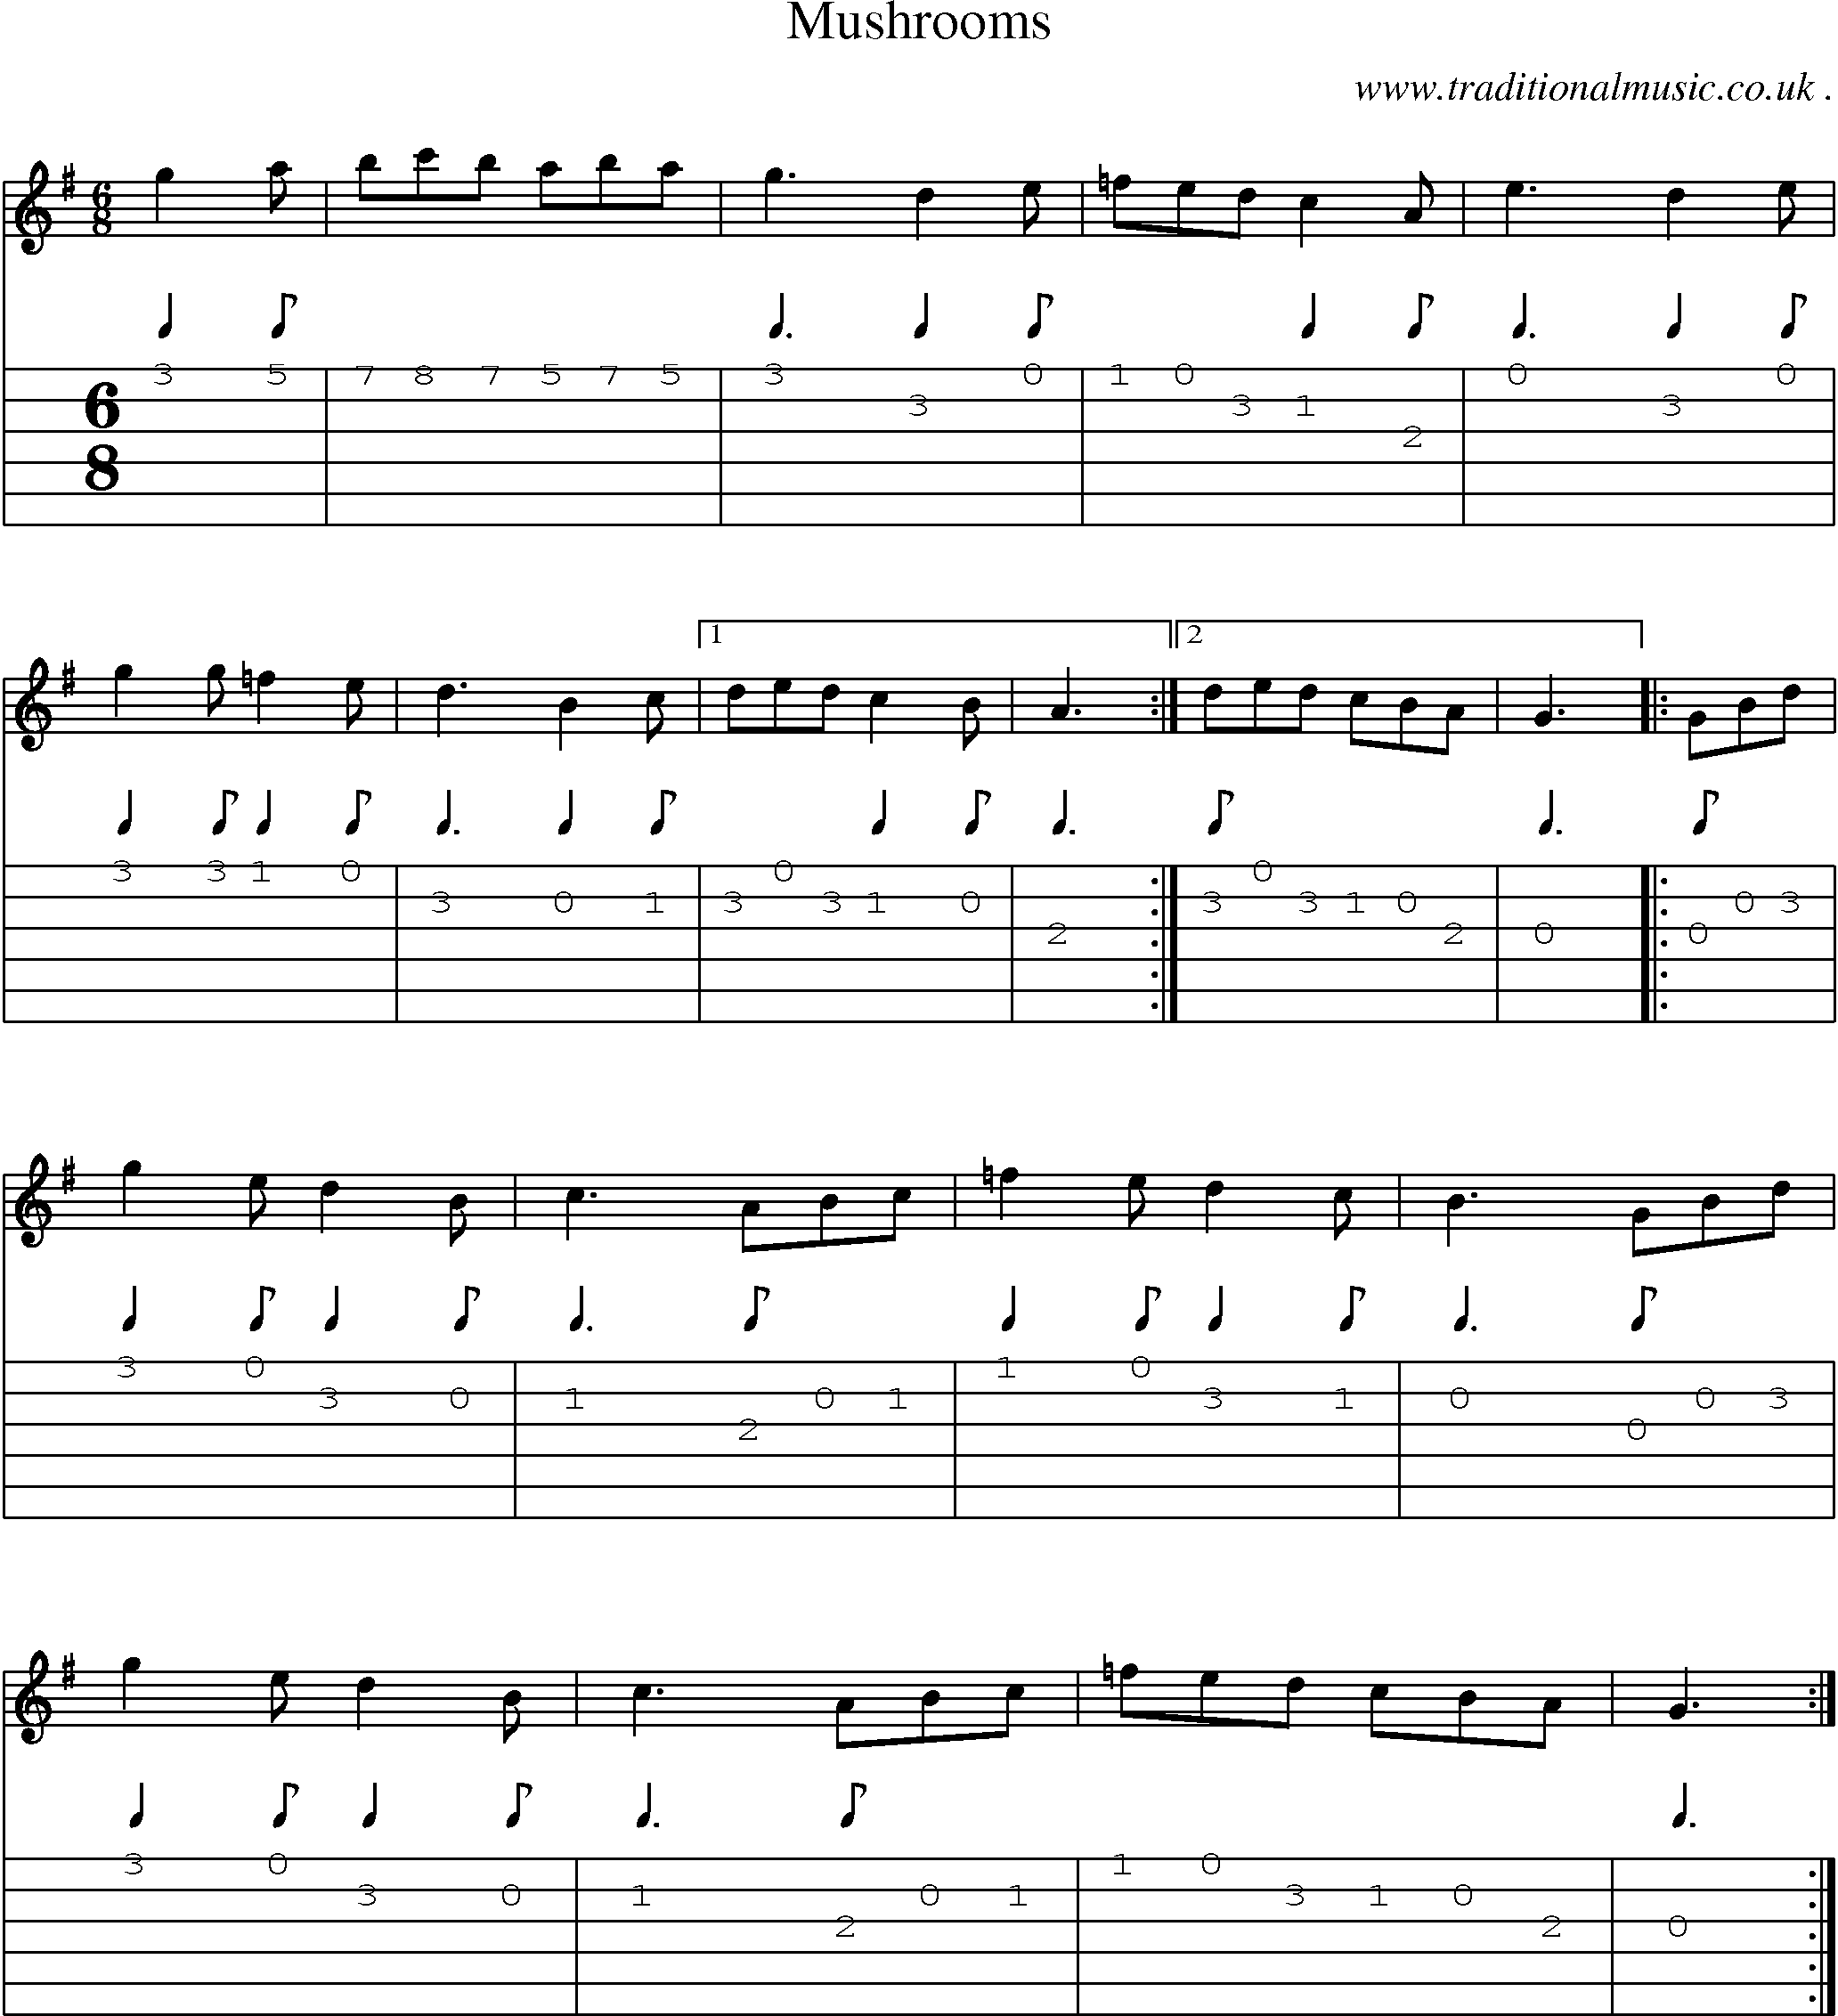 Sheet-Music and Guitar Tabs for Mushrooms